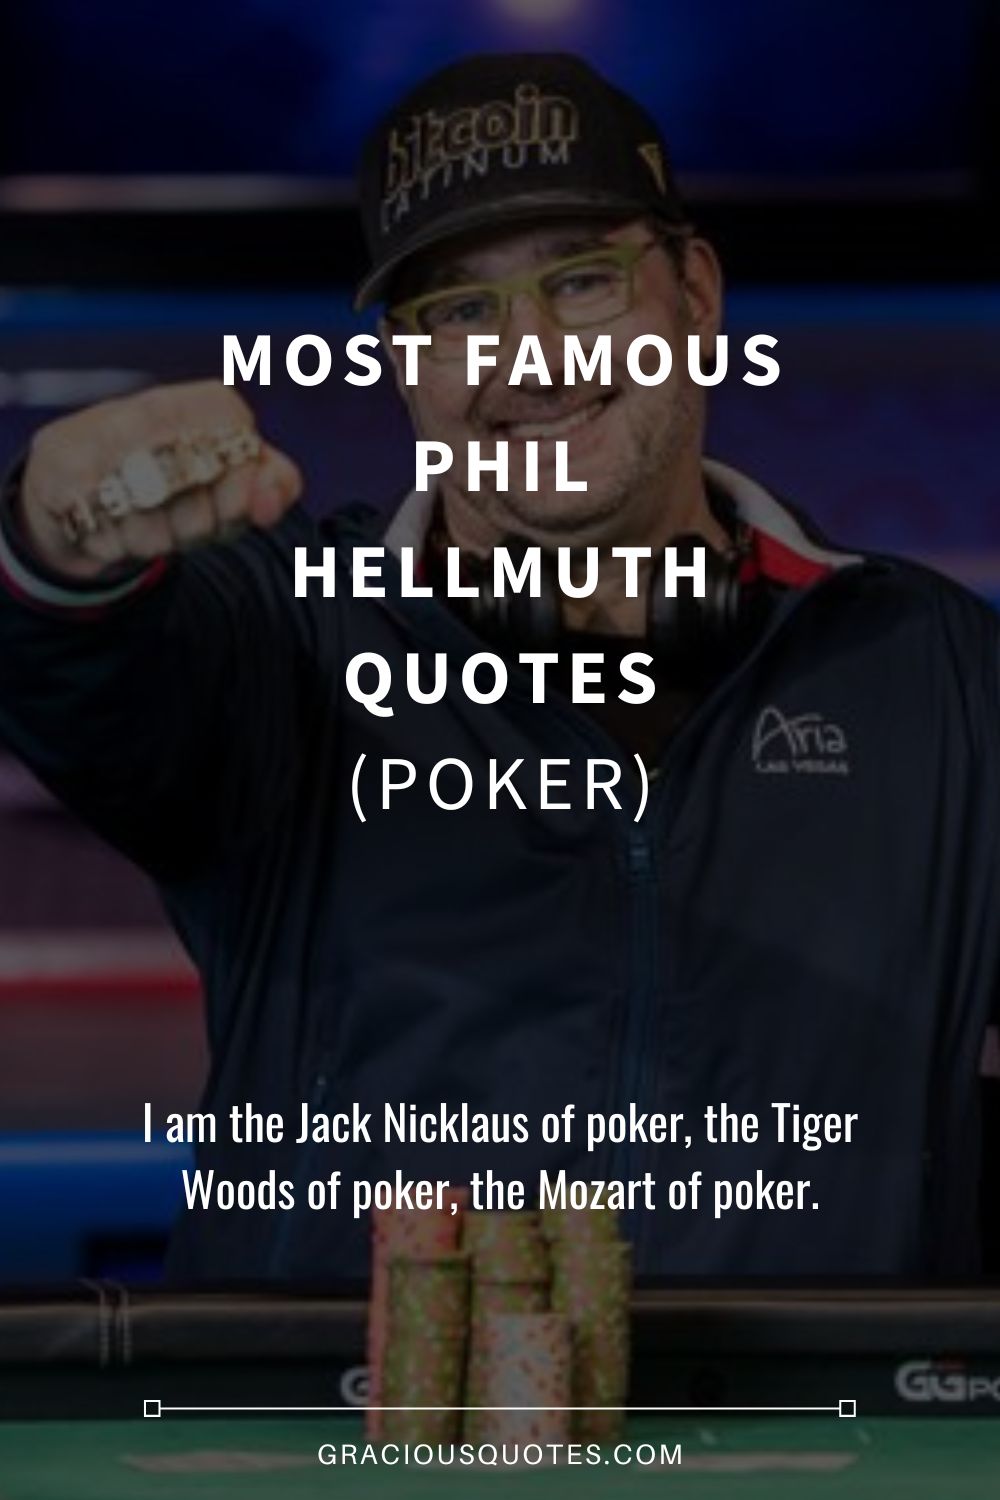 Most Famous Phil Hellmuth Quotes (POKER) - Gracious Quotes